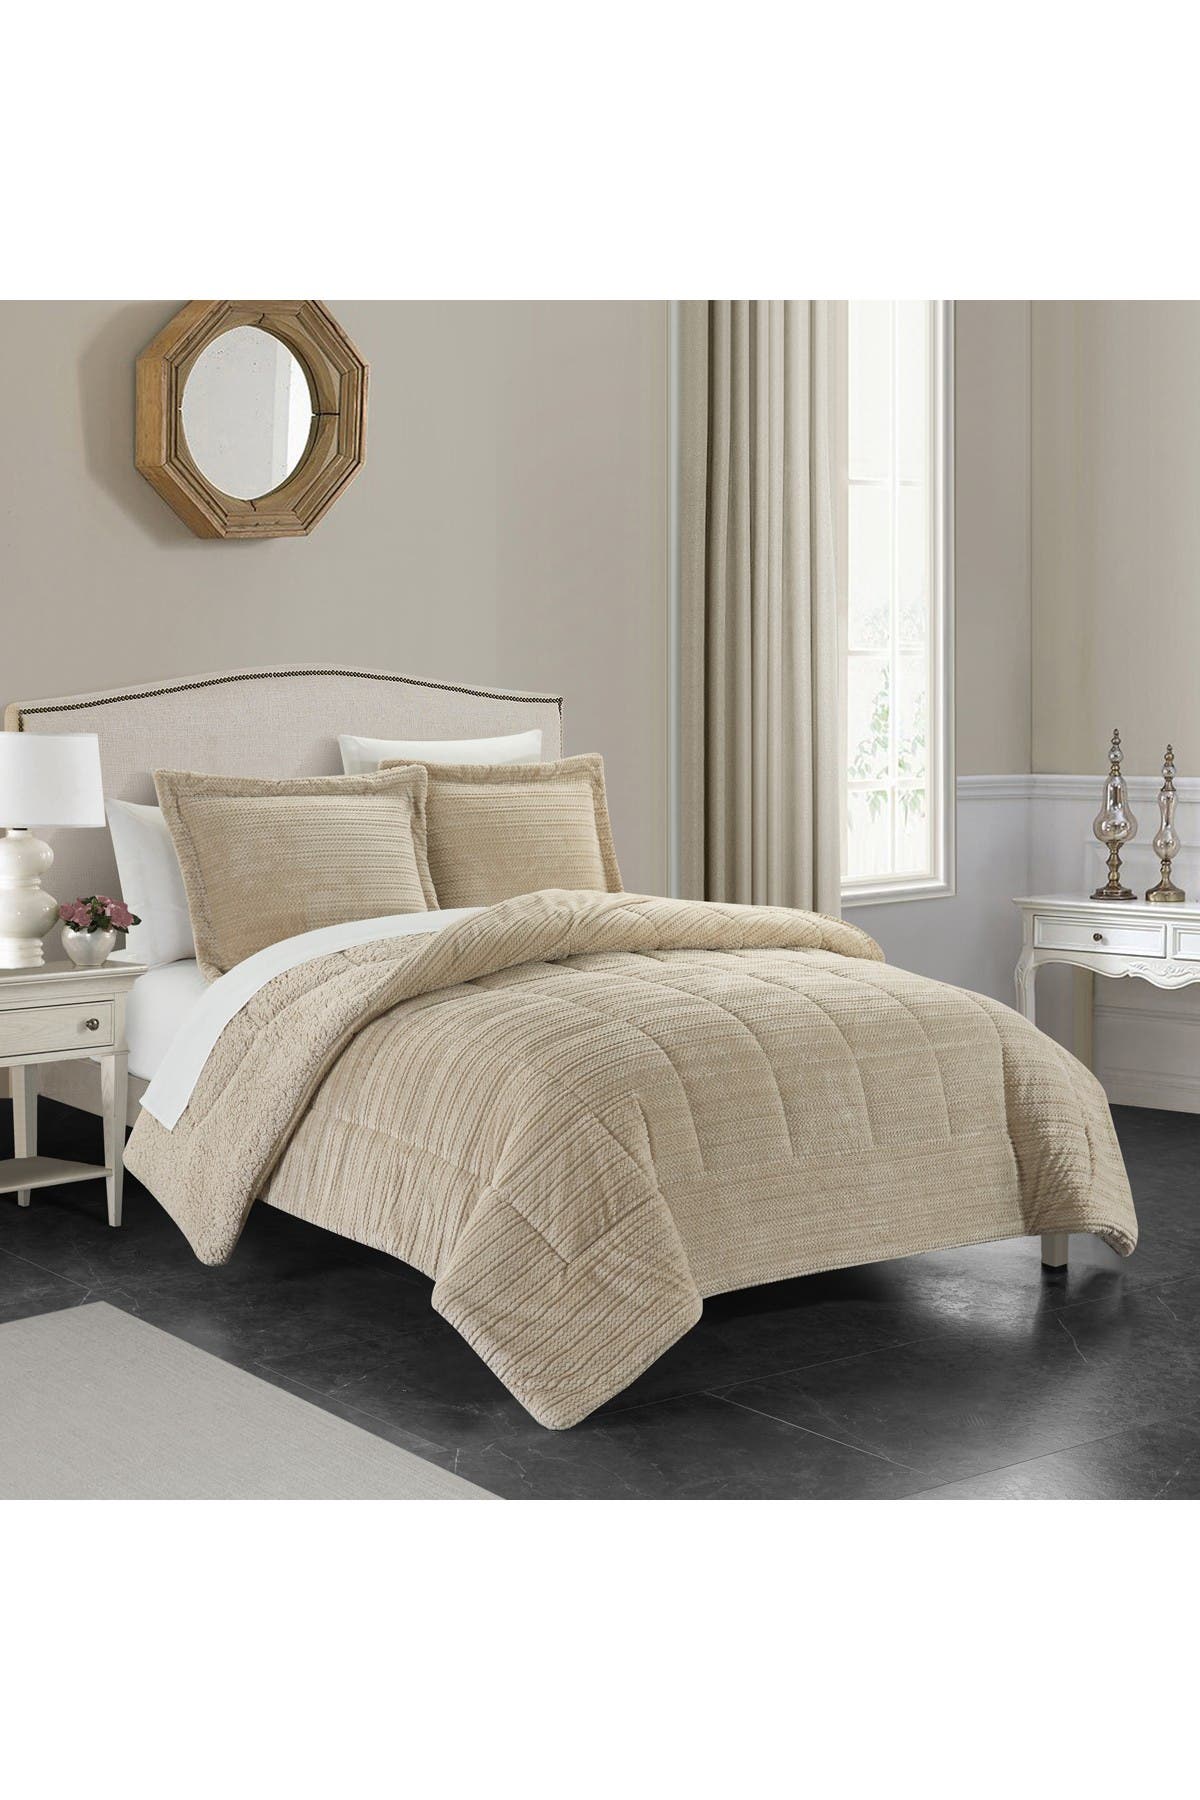 Chic Home Bedding Rashid Ribbed Texture Microplush Faux Shearling Lined King Comforter 3-piece Set In Beige/khaki